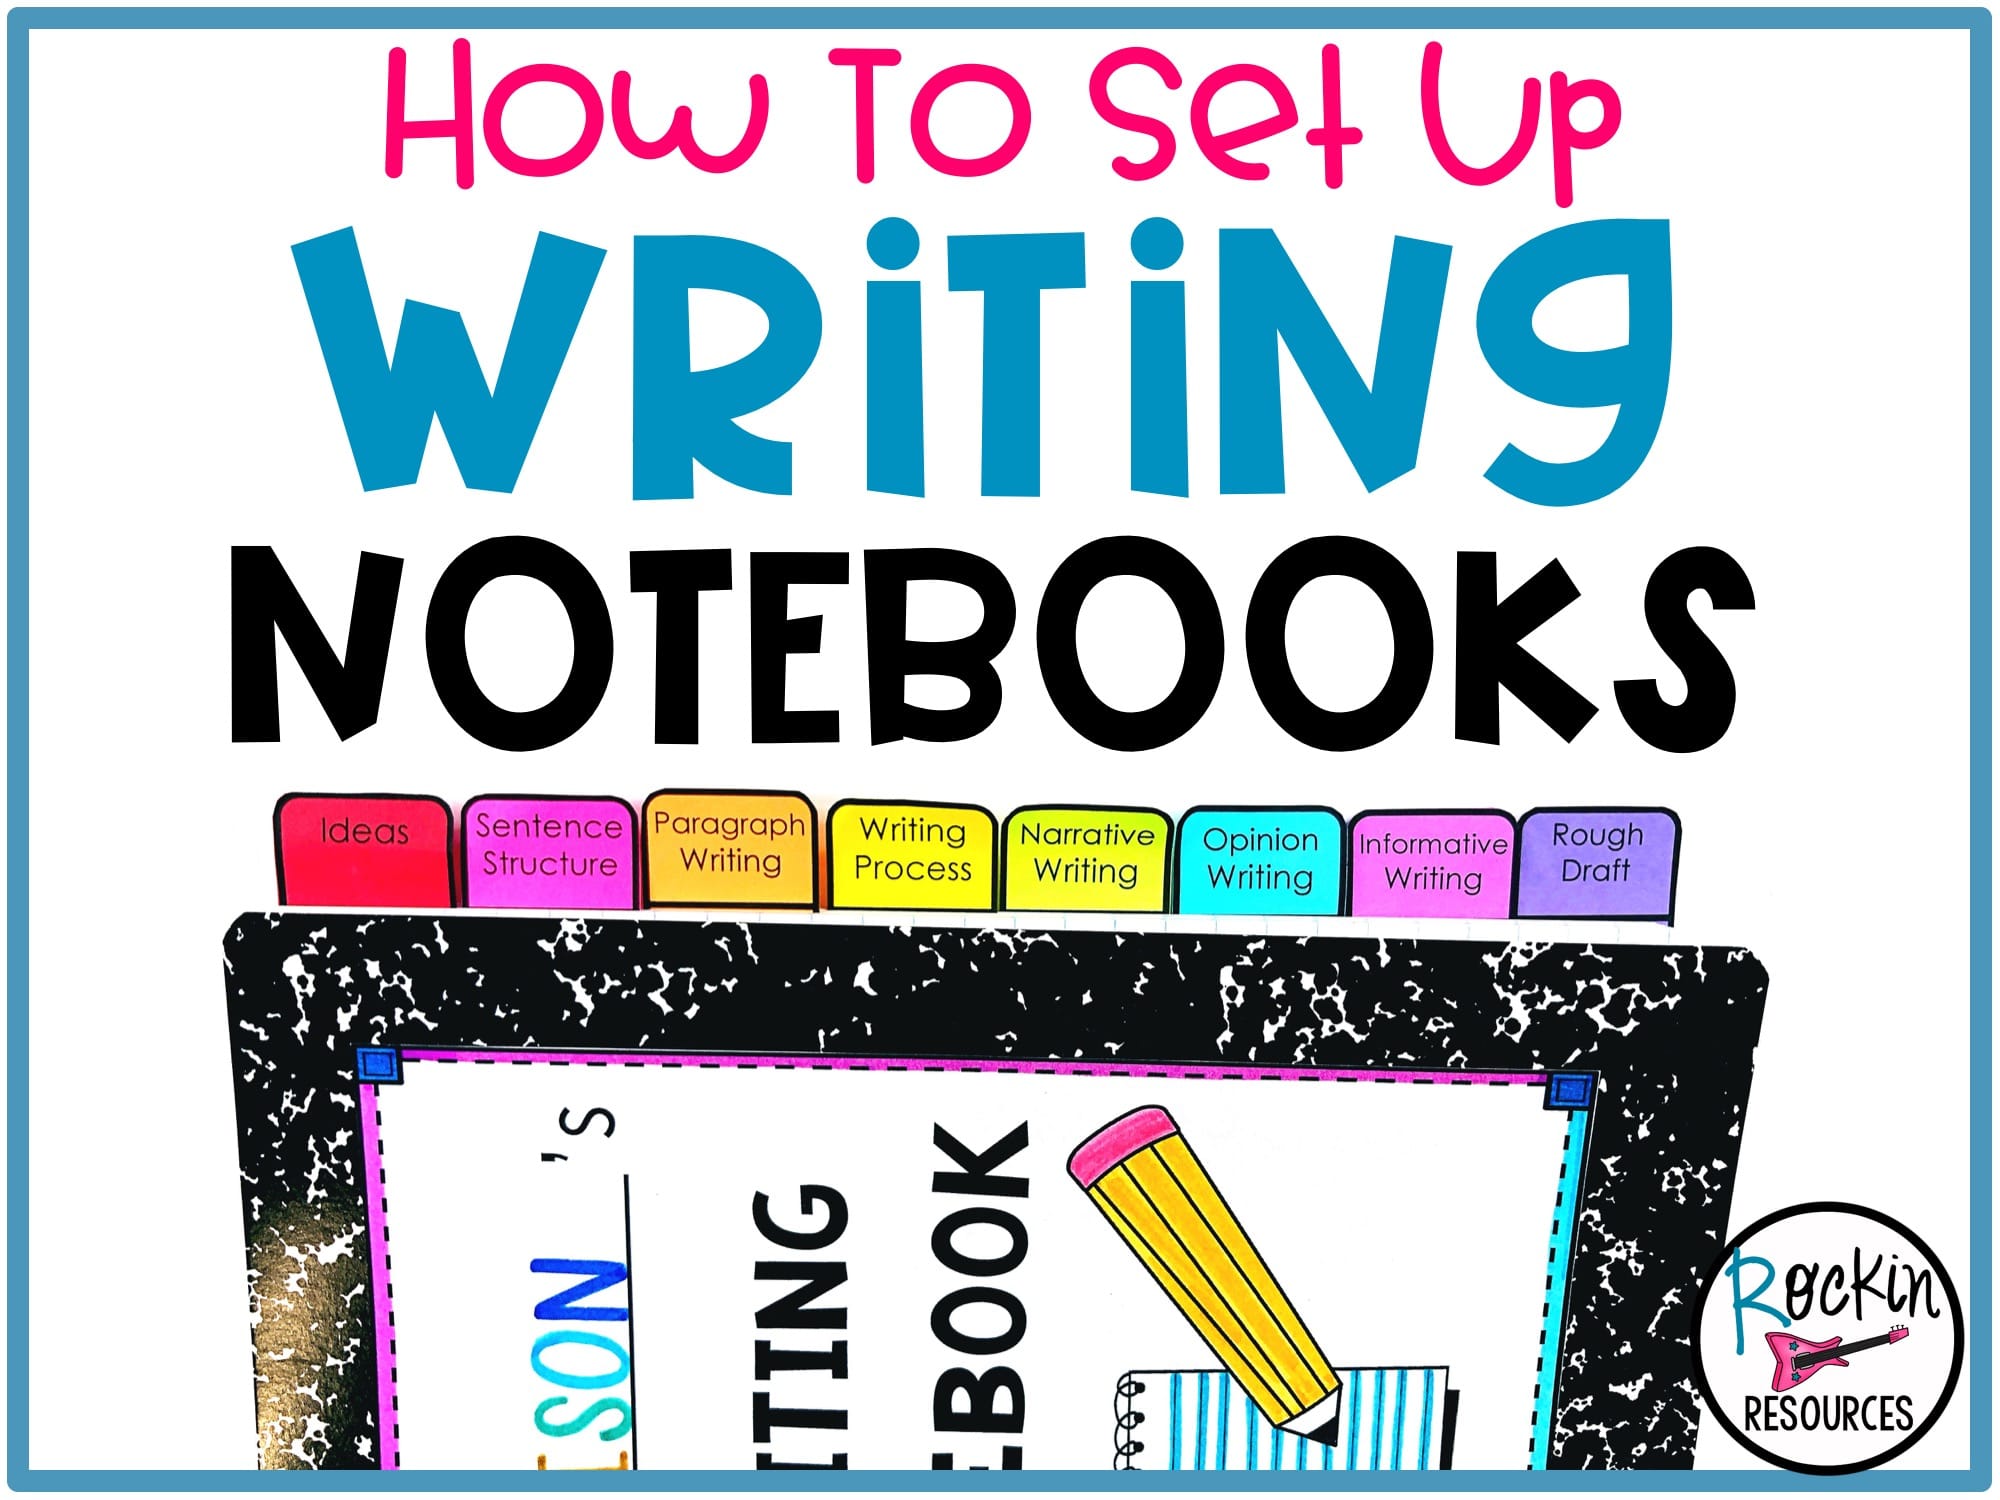 Writing Portfolios in Upper Elementary (Free Forms)